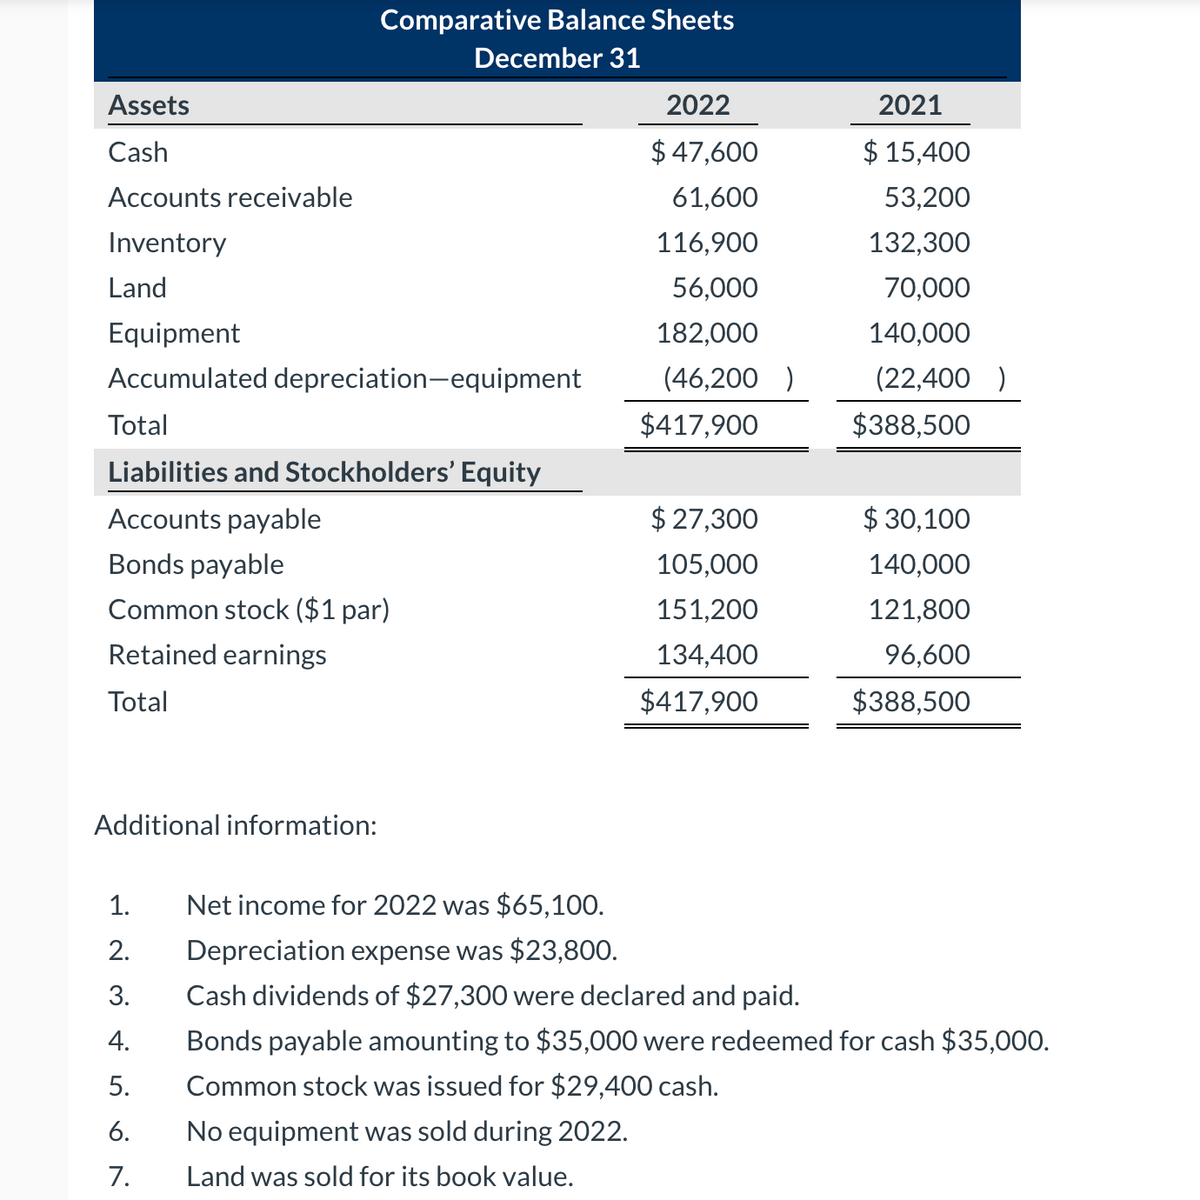 Comparative Balance Sheets
December 31
Assets
2022
2021
Cash
$ 47,600
$ 15,400
Accounts receivable
61,600
53,200
Inventory
116,900
132,300
Land
56,000
70,000
Equipment
182,000
140,000
Accumulated depreciation-equipment
(46,200 )
(22,400 )
Total
$417,900
$388,500
Liabilities and Stockholders' Equity
Accounts payable
$ 27,300
$ 30,100
Bonds payable
105,000
140,000
Common stock ($1 par)
151,200
121,800
Retained earnings
134,400
96,600
Total
$417,900
$388,500
Additional information:
1.
Net income for 2022 was $65,100.
2.
Depreciation expense was $23,800.
3.
Cash dividends of $27,300 were declared and paid.
4.
Bonds payable amounting to $35,000 were redeemed for cash $35,000.
5.
Common stock was issued for $29,400 cash.
6.
No equipment was sold during 2022.
7.
Land was sold for its book value.
